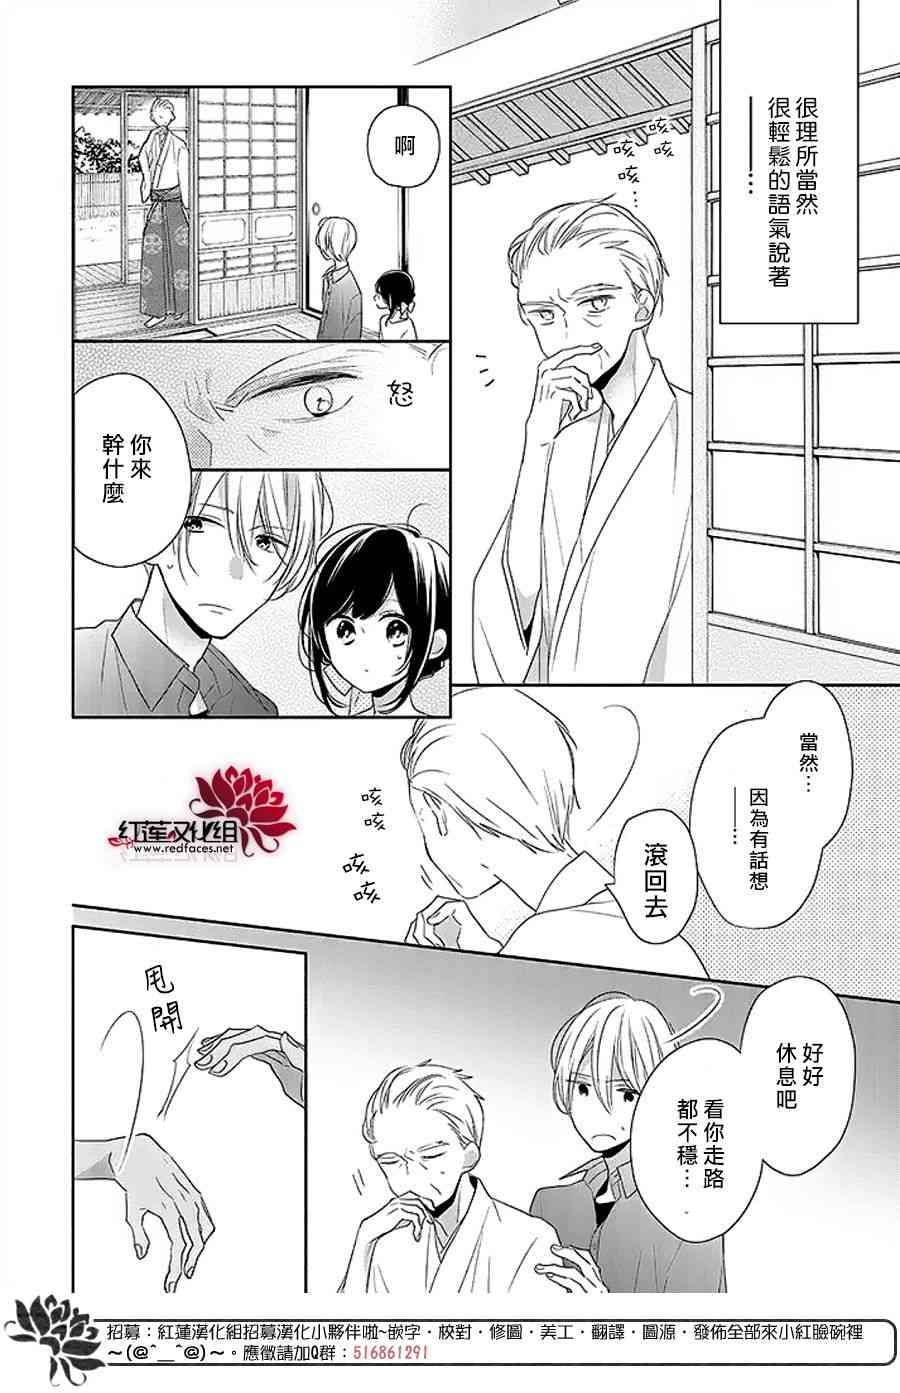 If given a second chance - 13話 - 6